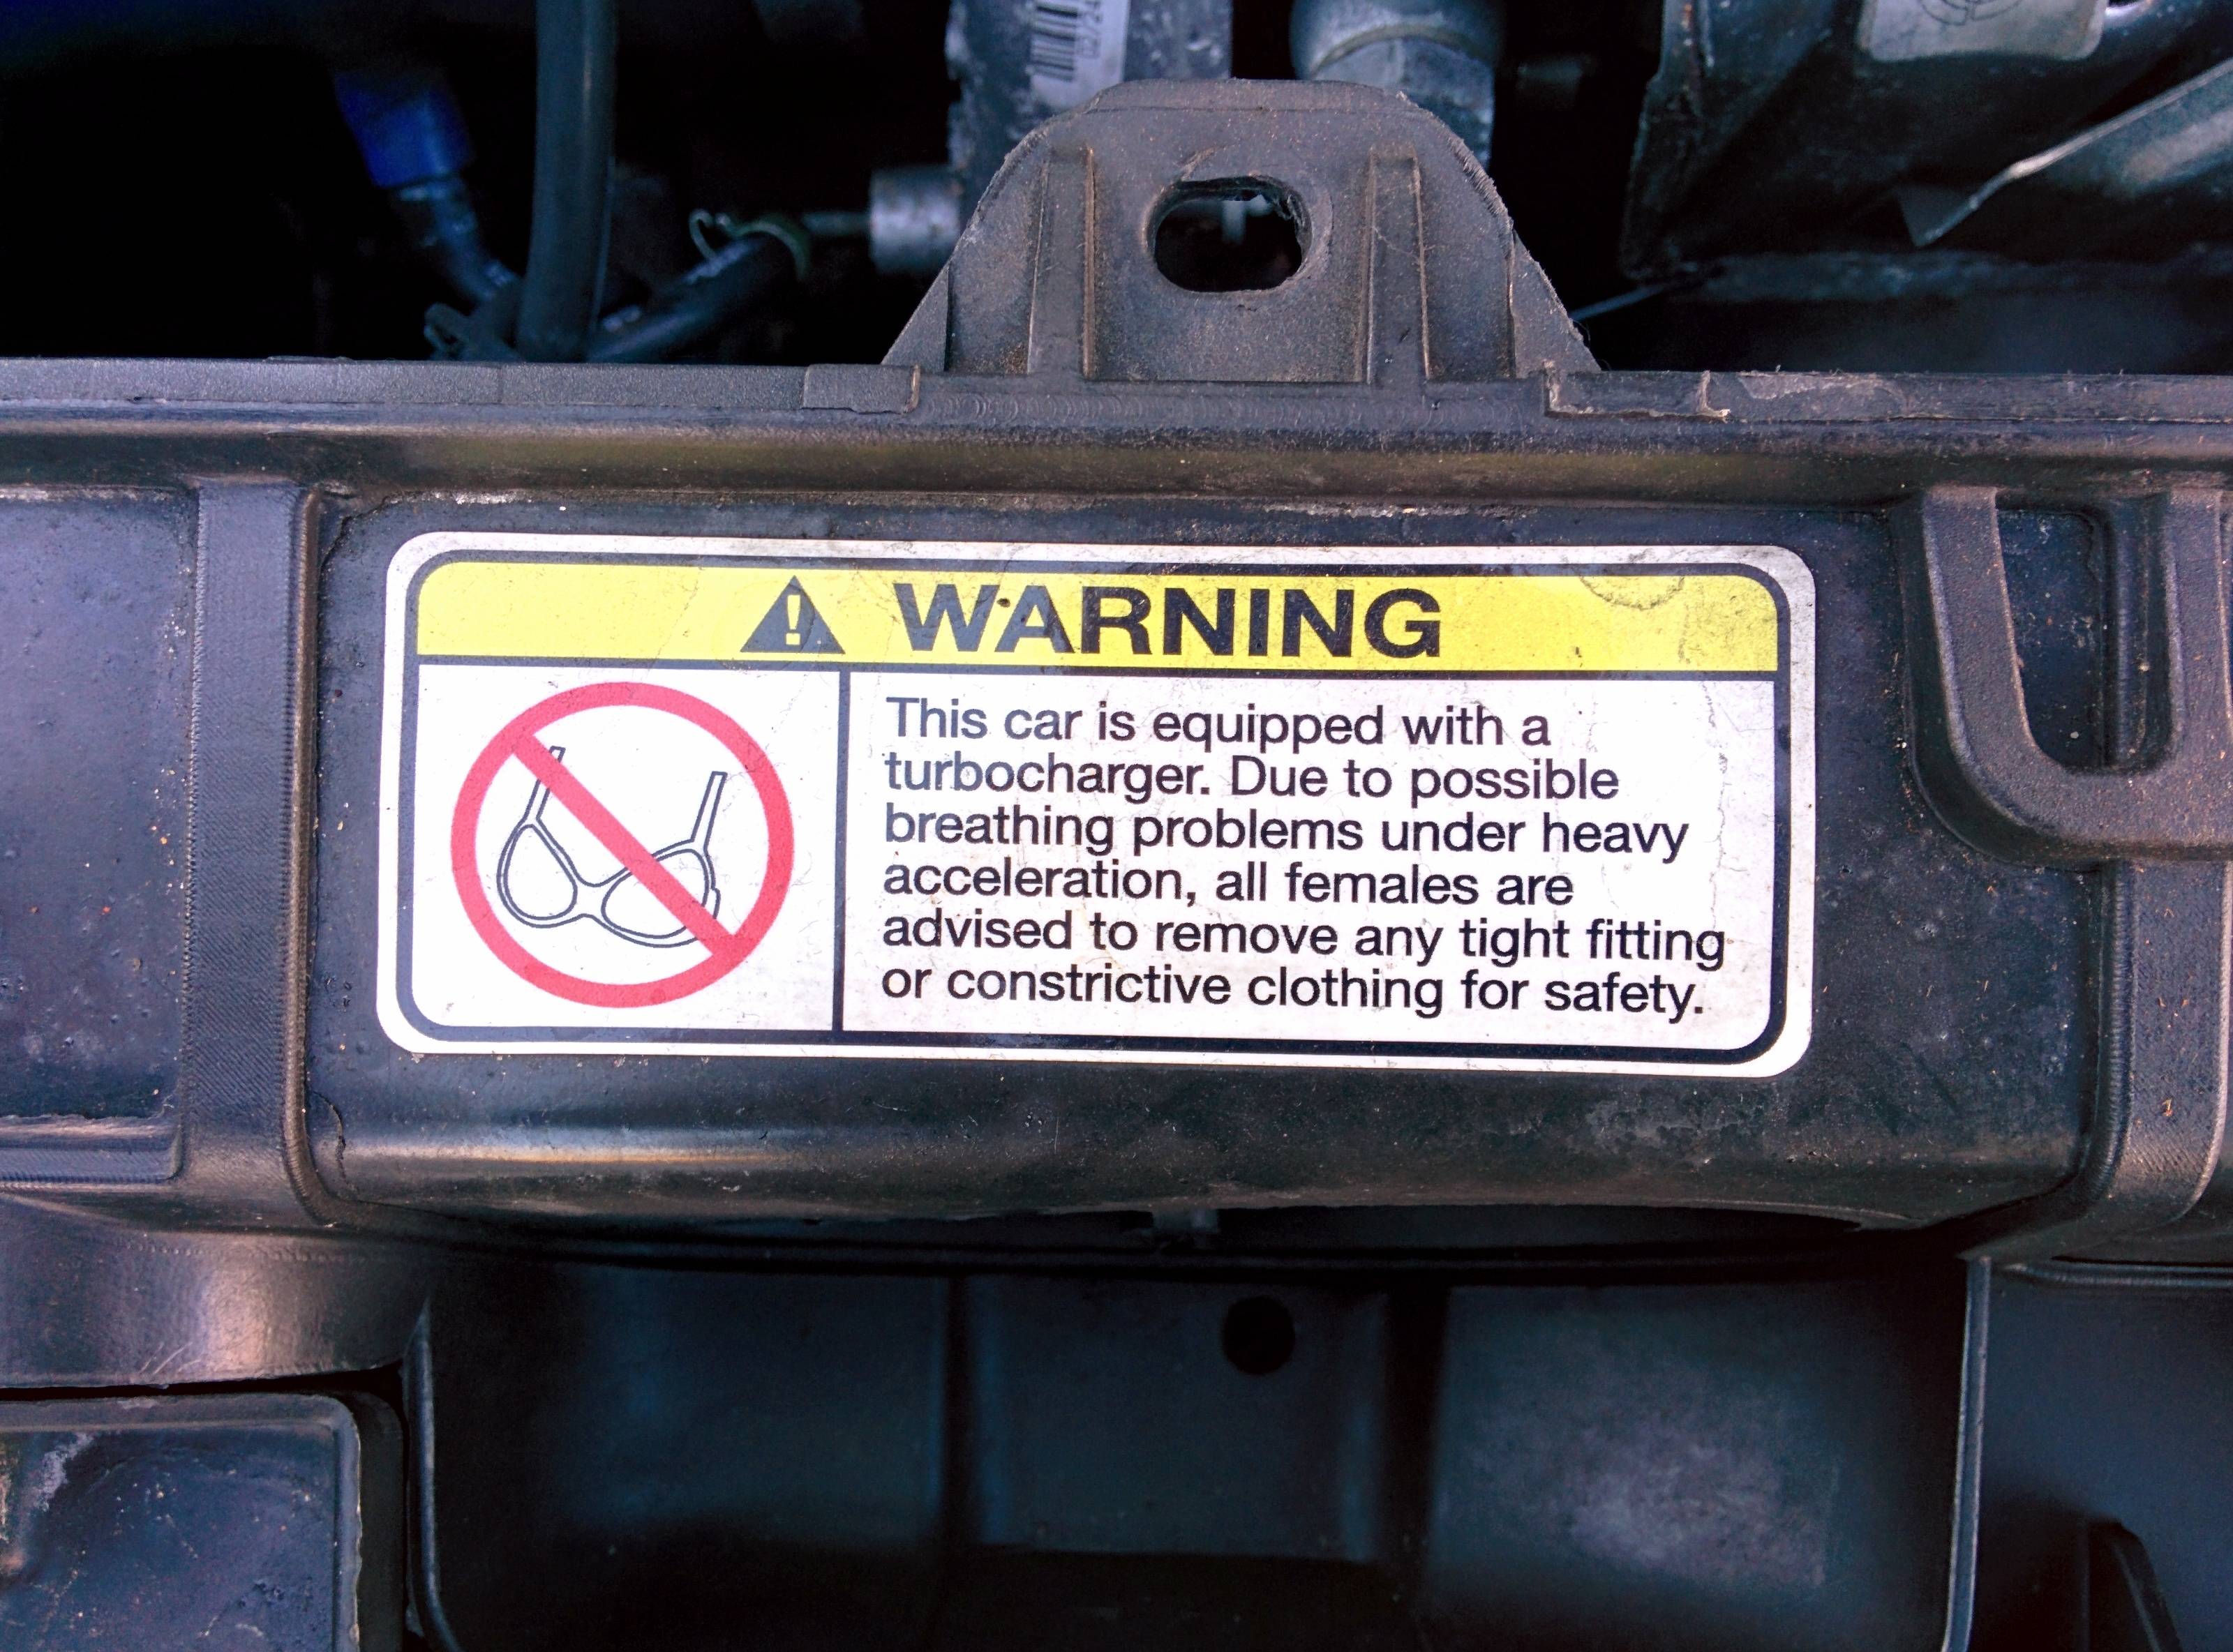 awesome random pics - no bra zone - A Warning This car is equipped with a turbocharger. Due to possible breathing problems under heavy acceleration, all females are advised to remove any tight fitting or constrictive clothing for safety.